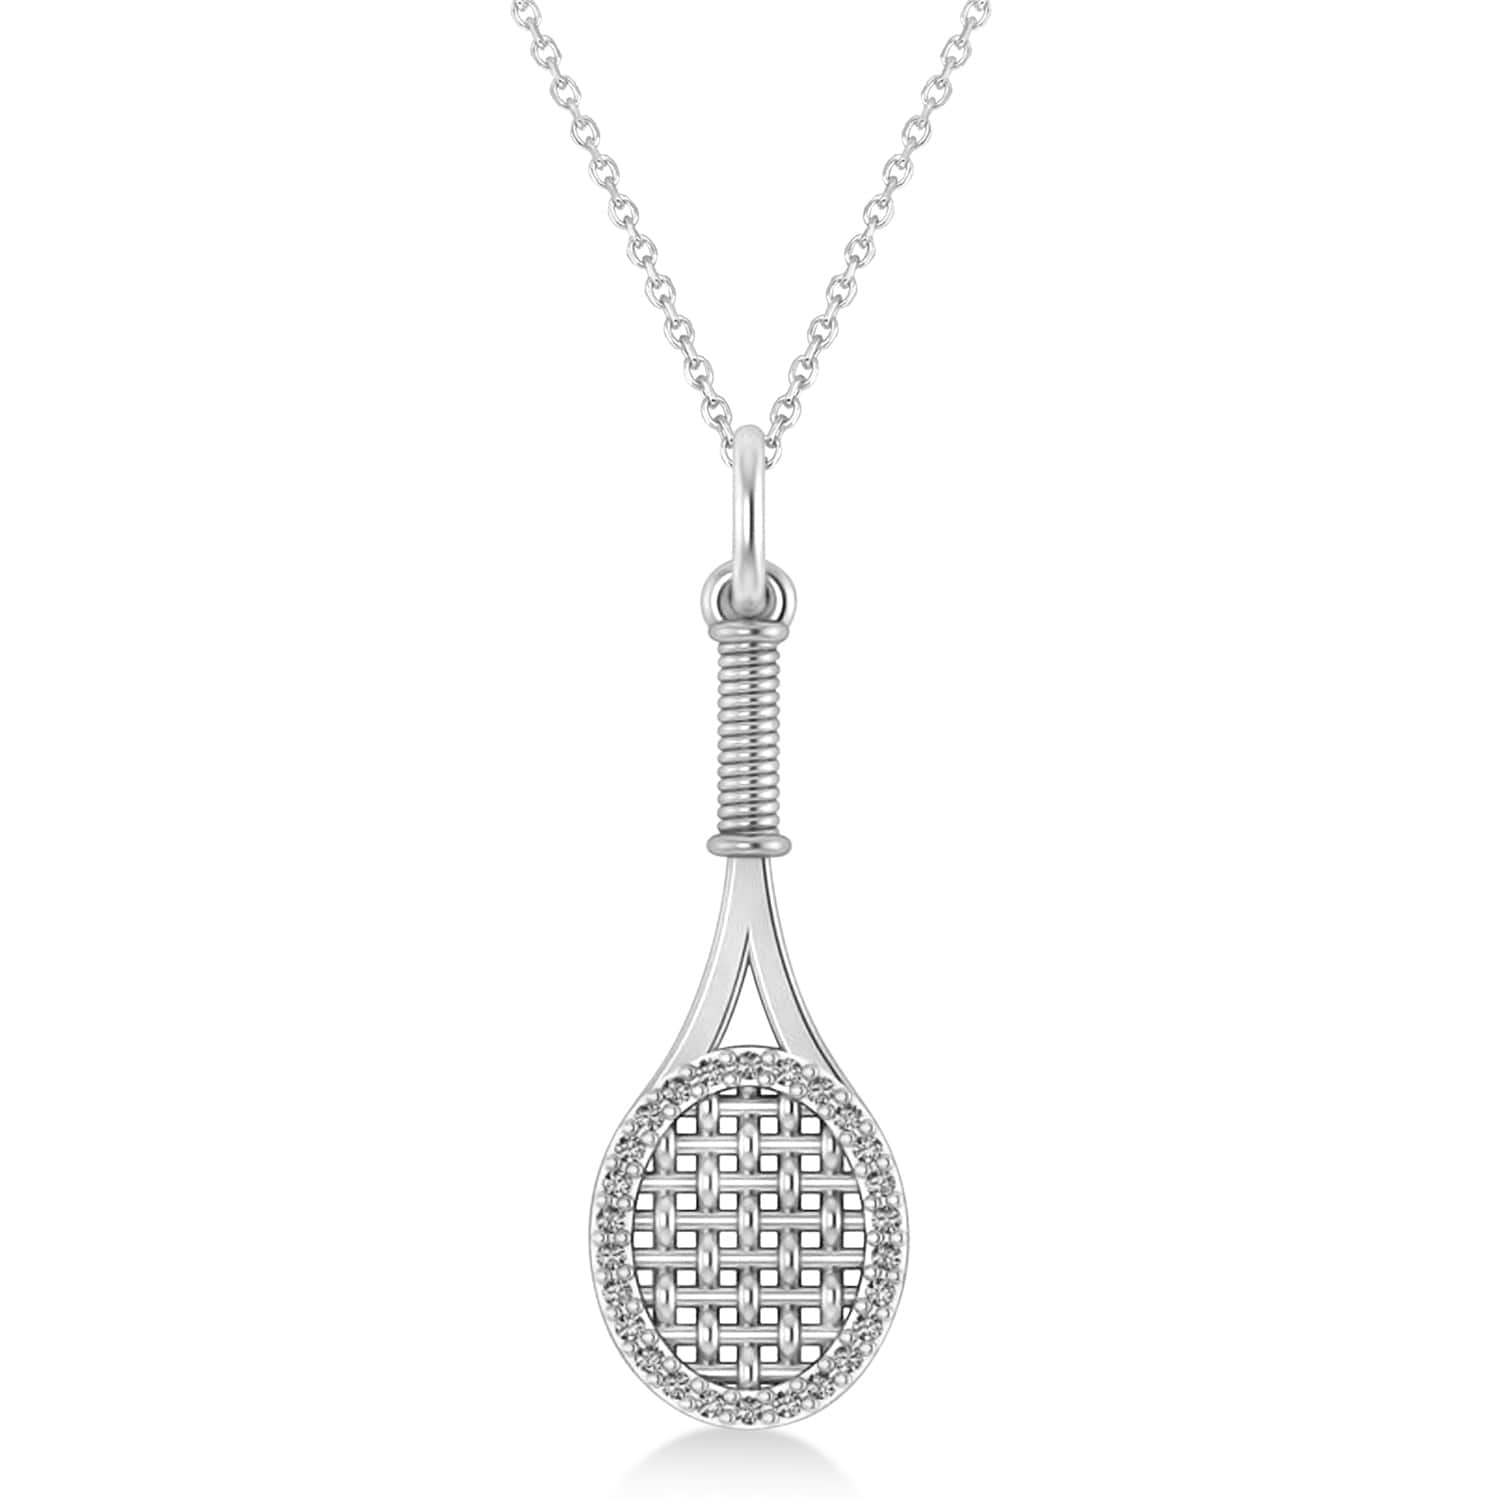 Lab Grown Diamond Tennis Racket Pendant Necklace in Sterling Silver (0.48ct)